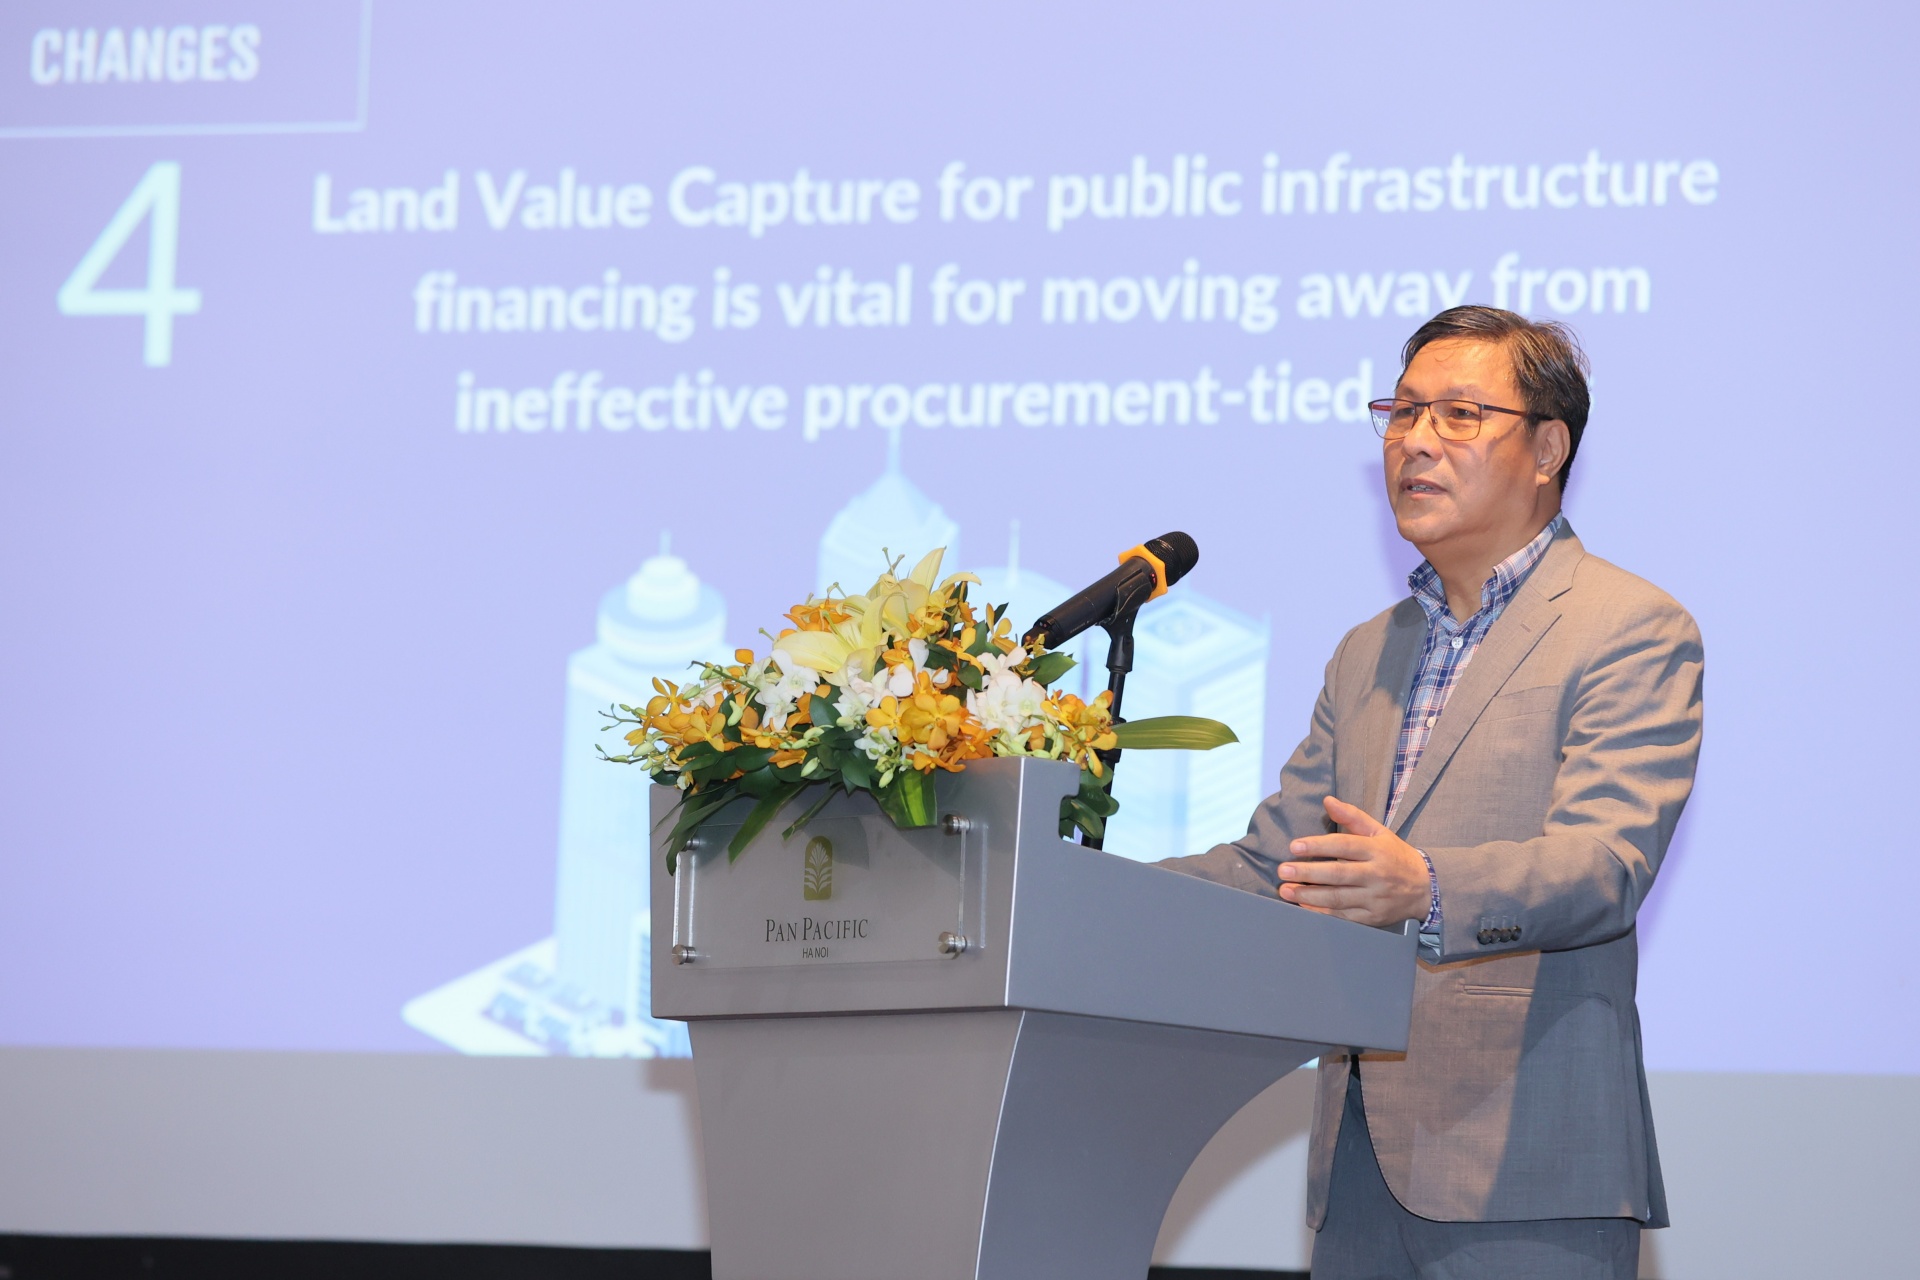 Asia-Pacific Capital Projects & Infrastructure Summit spotlights sustainability